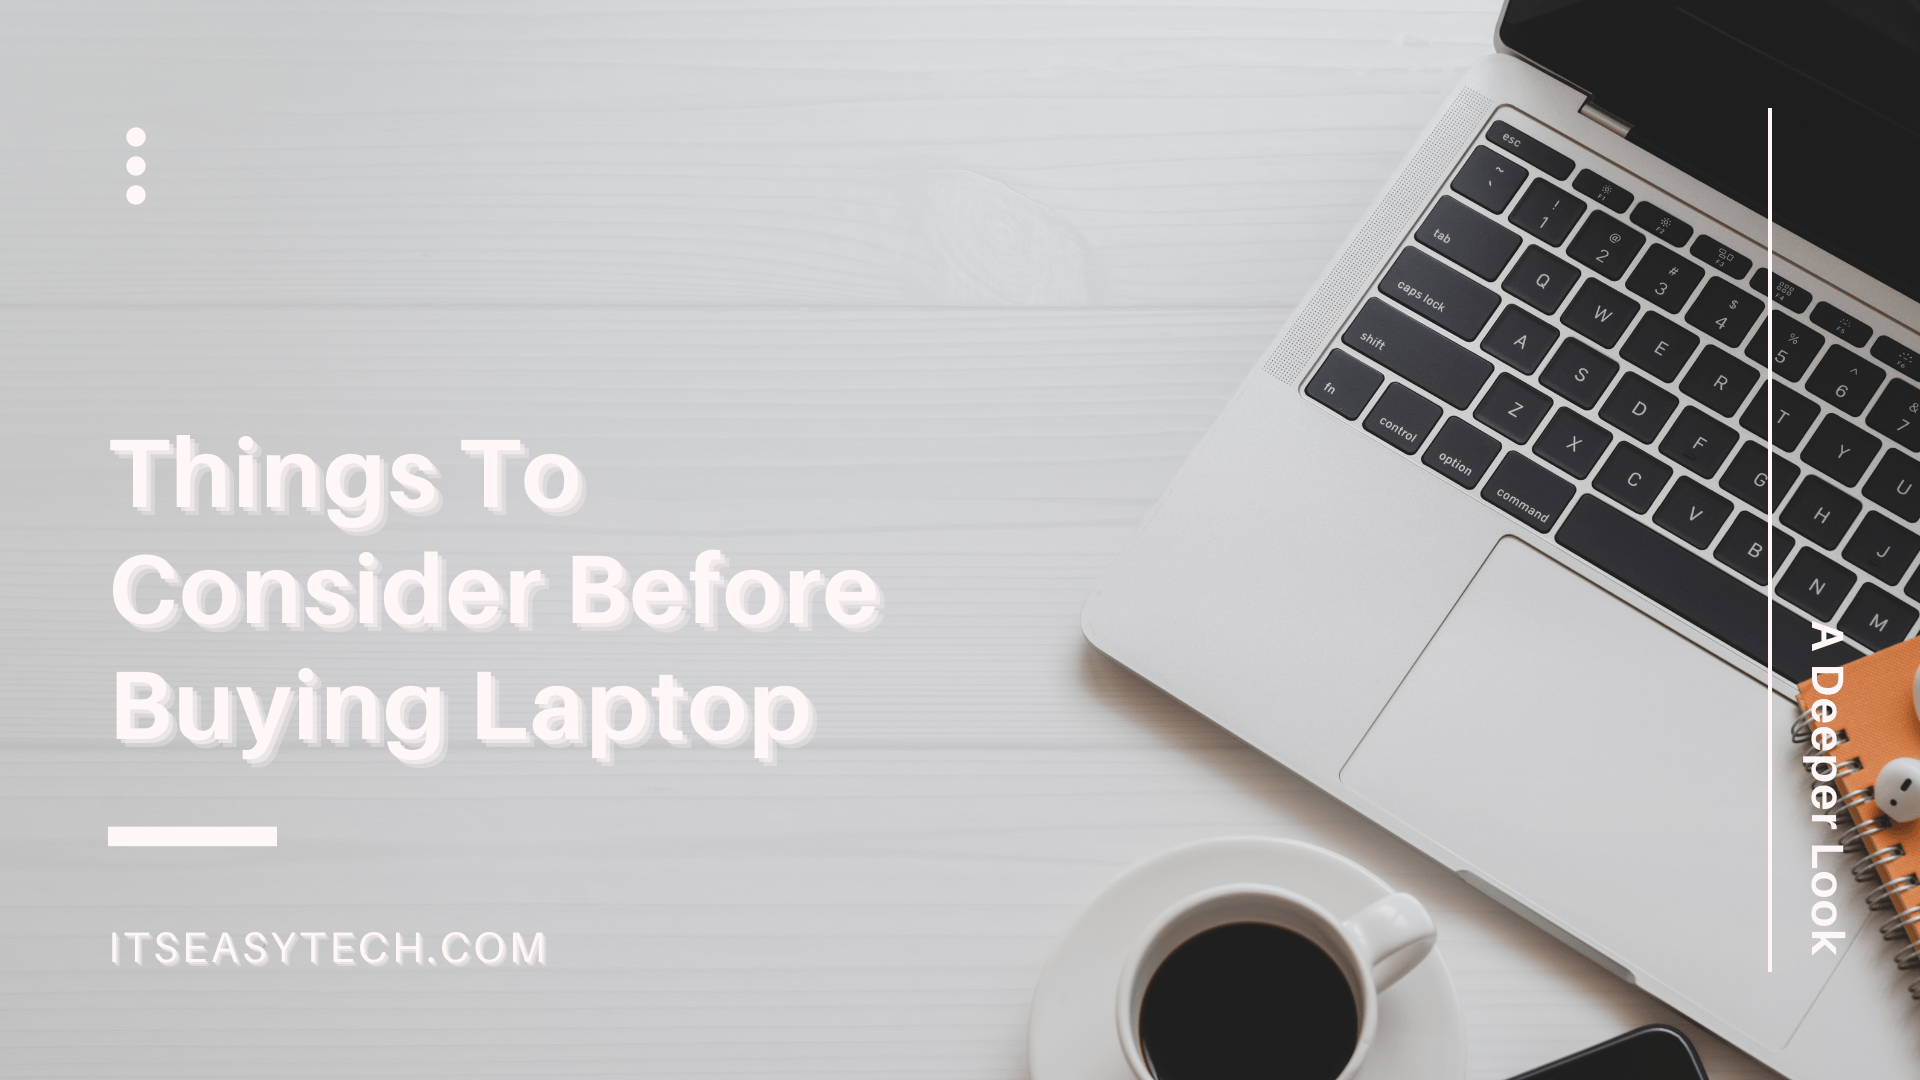 9 Key Things To Consider Before Buying The Laptop in 2023